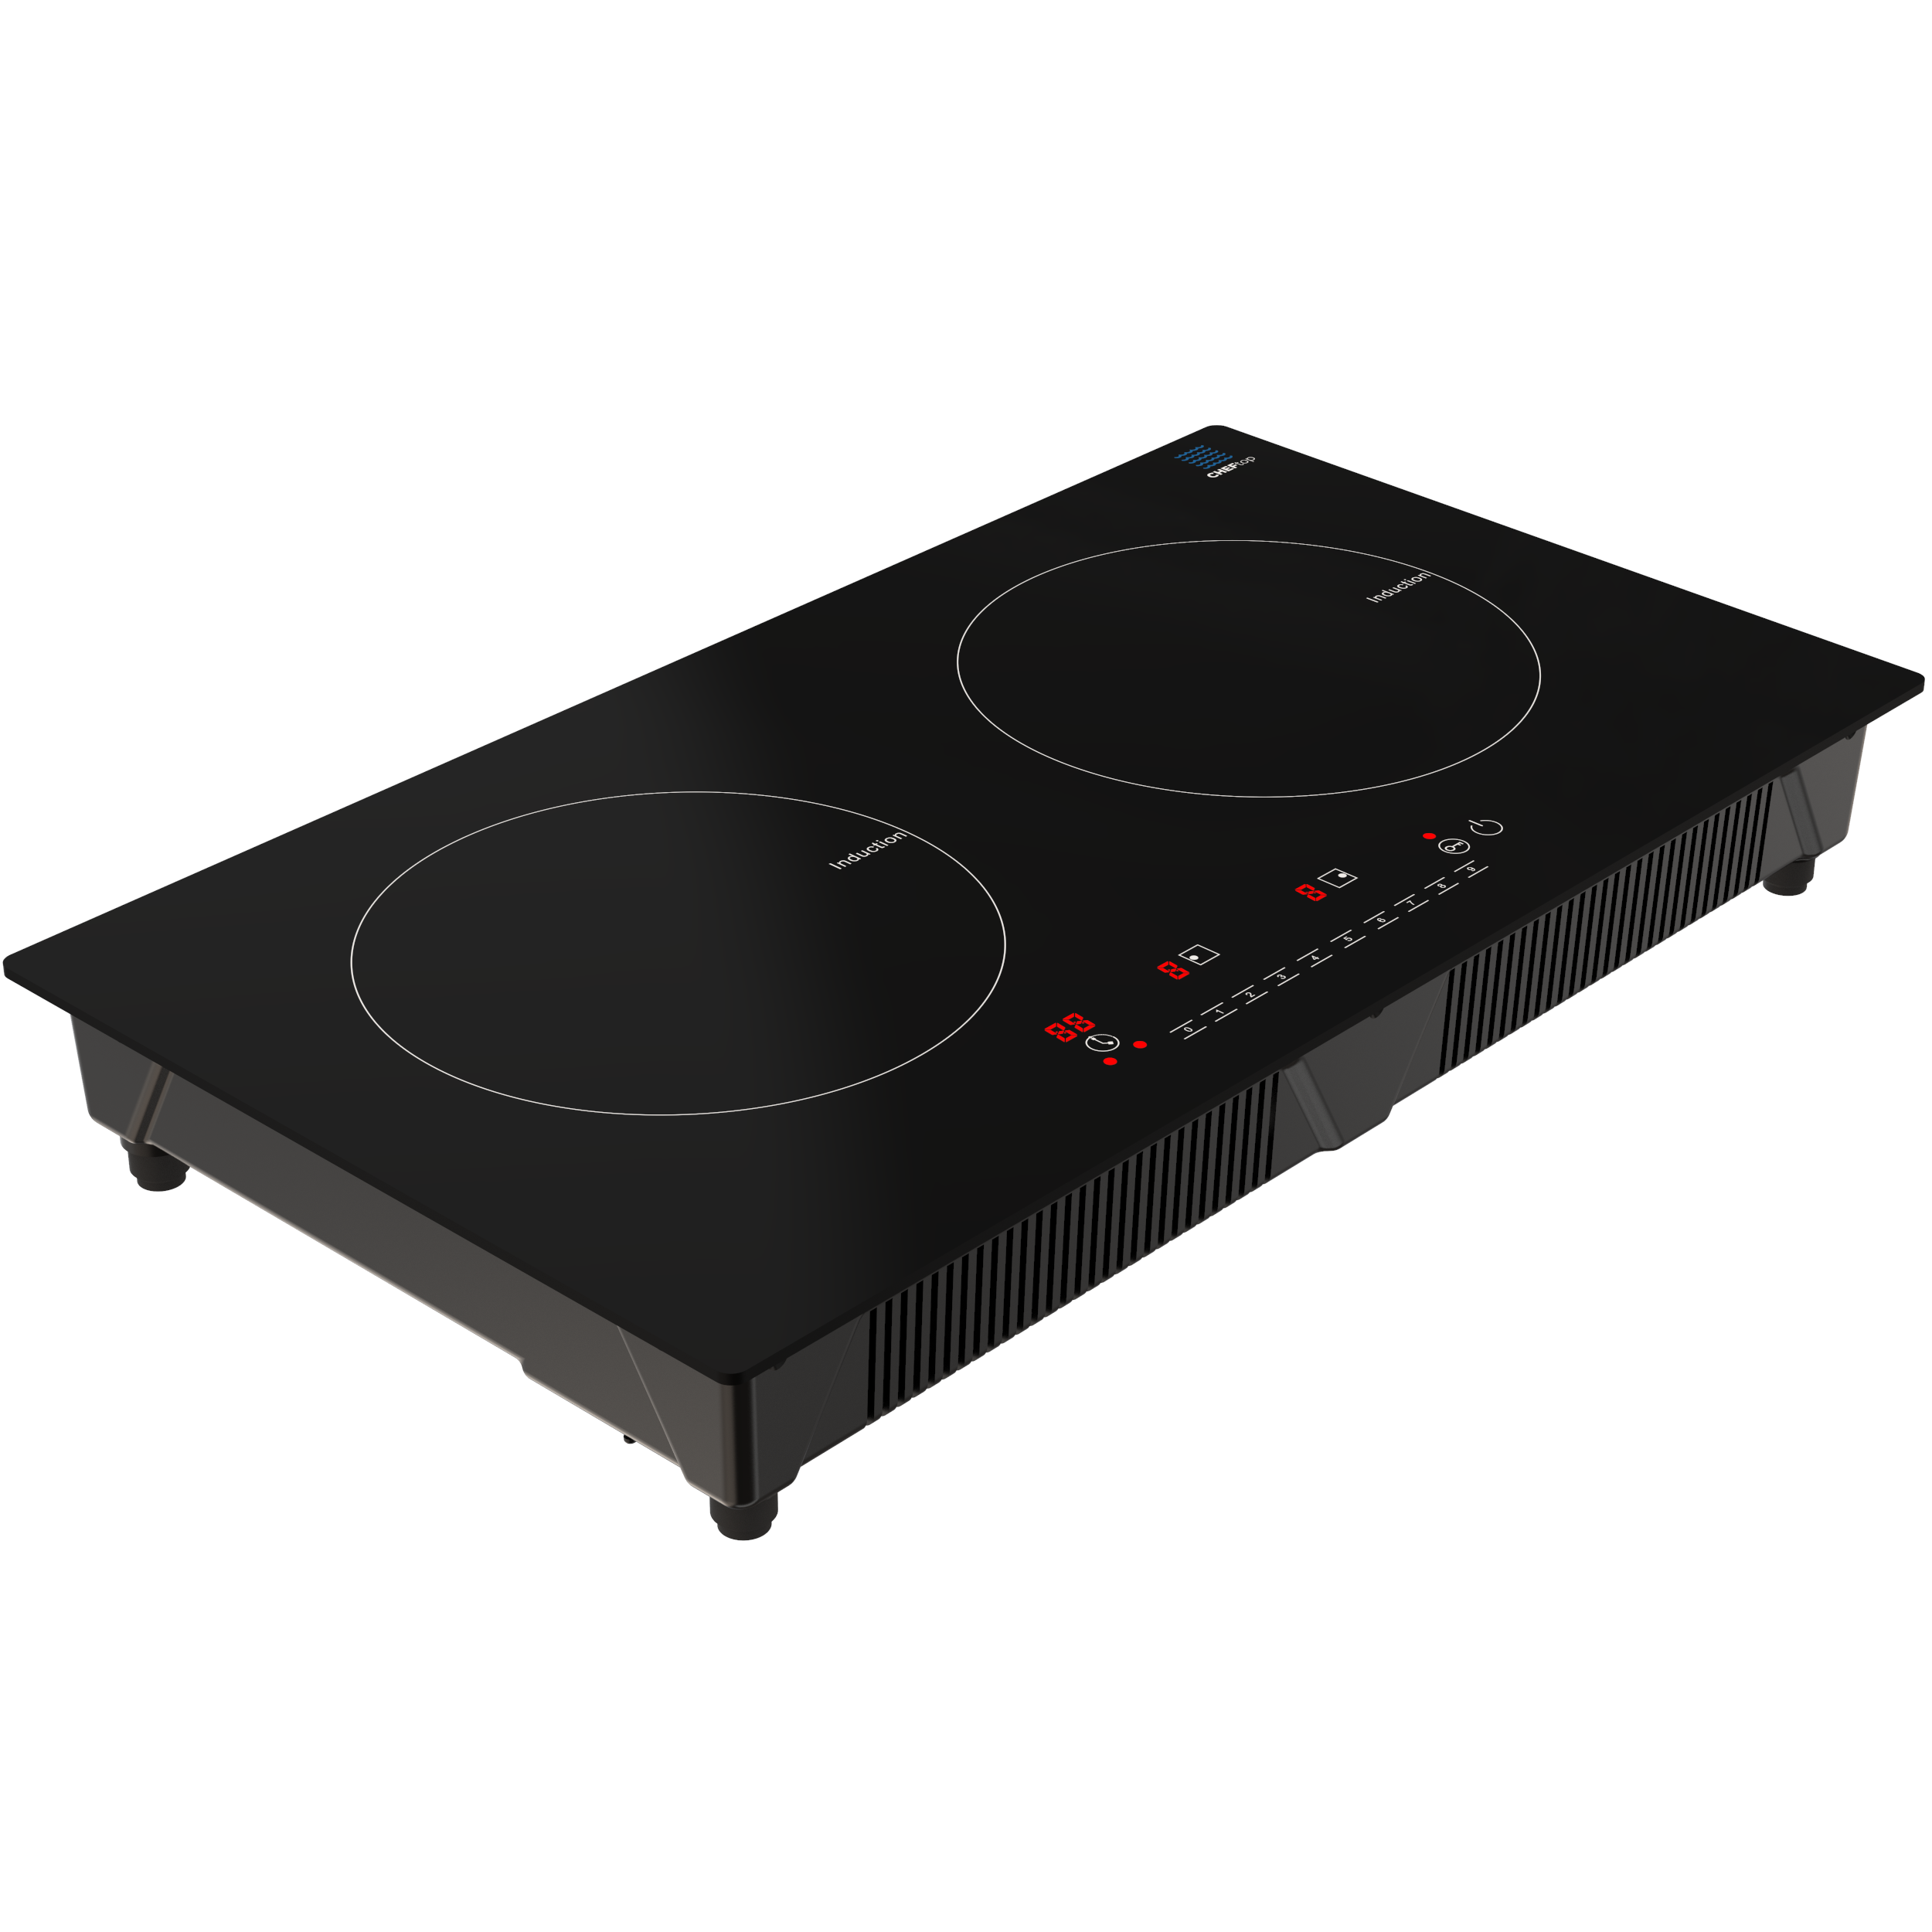 Double Burner, 1800W Ceramic Electric Hot Plate for Cooking, Dual